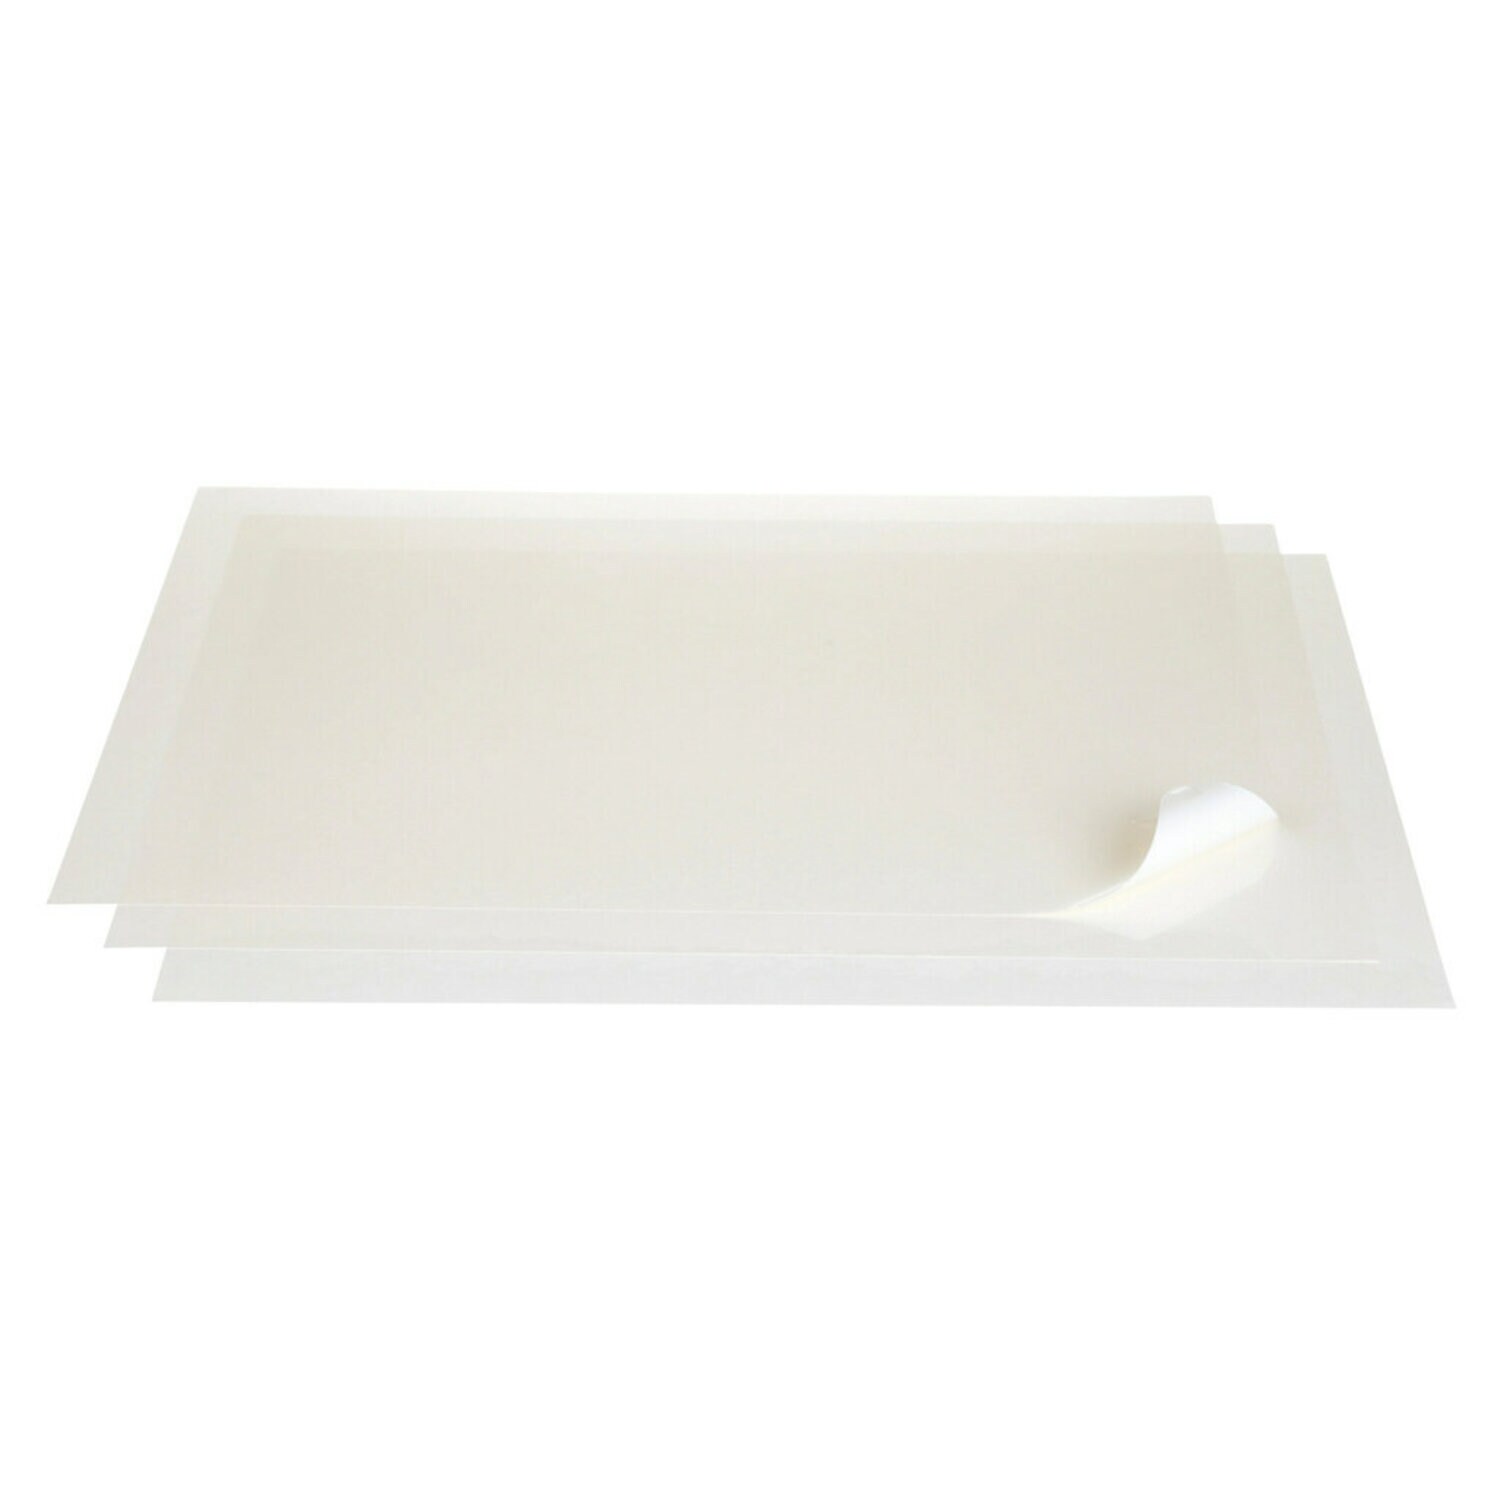 7000028885 - 3M Sheet and Screen Label Material 7950, Clear Polyester, 508 mm x 686 mm, 100 Sheet/Case